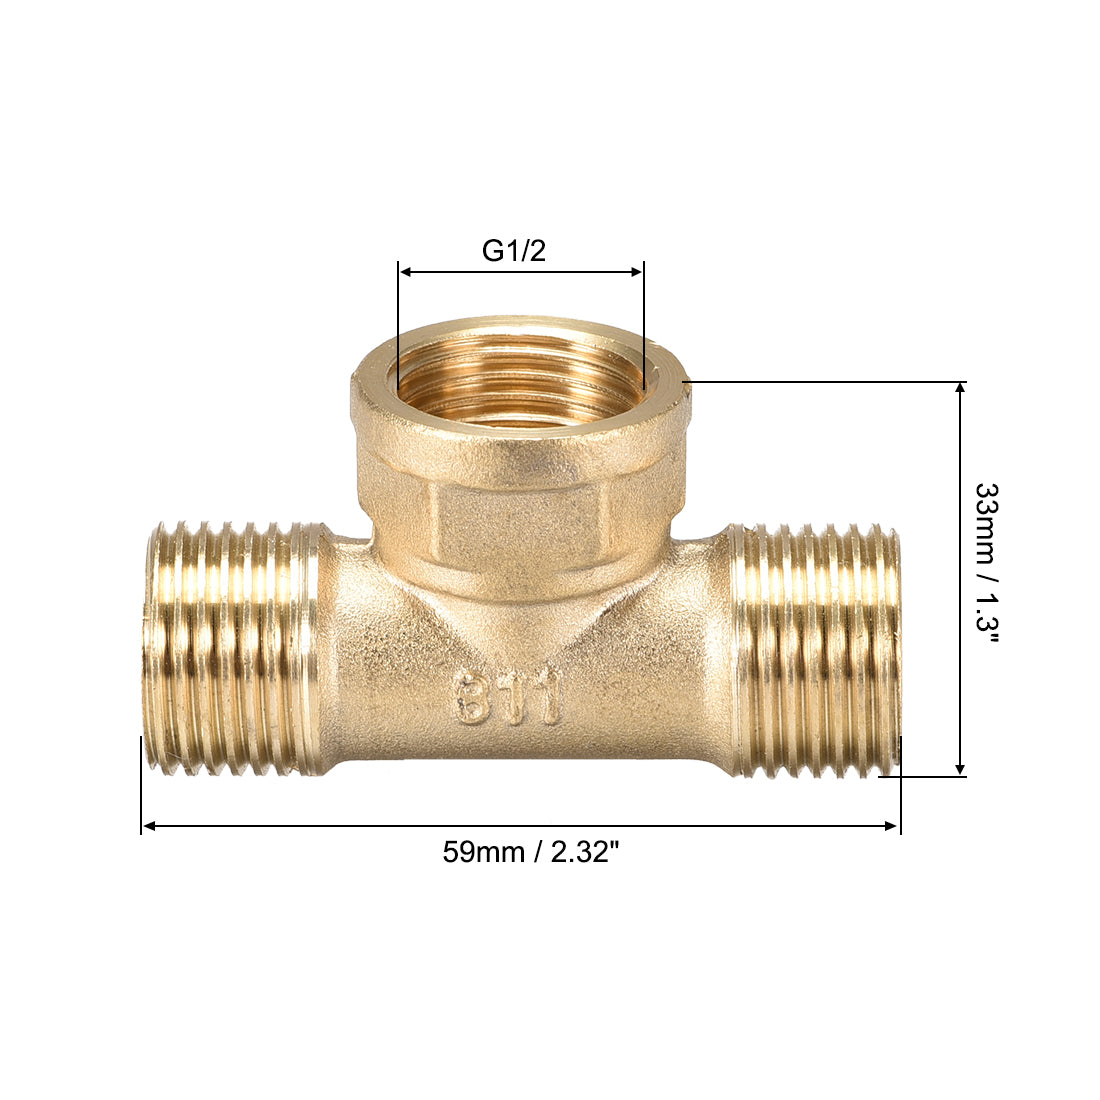 uxcell Uxcell Brass Tee Pipe Fitting G1/2 Male x G1/2  Female x G1/2 Male T Shaped Connector Coupler